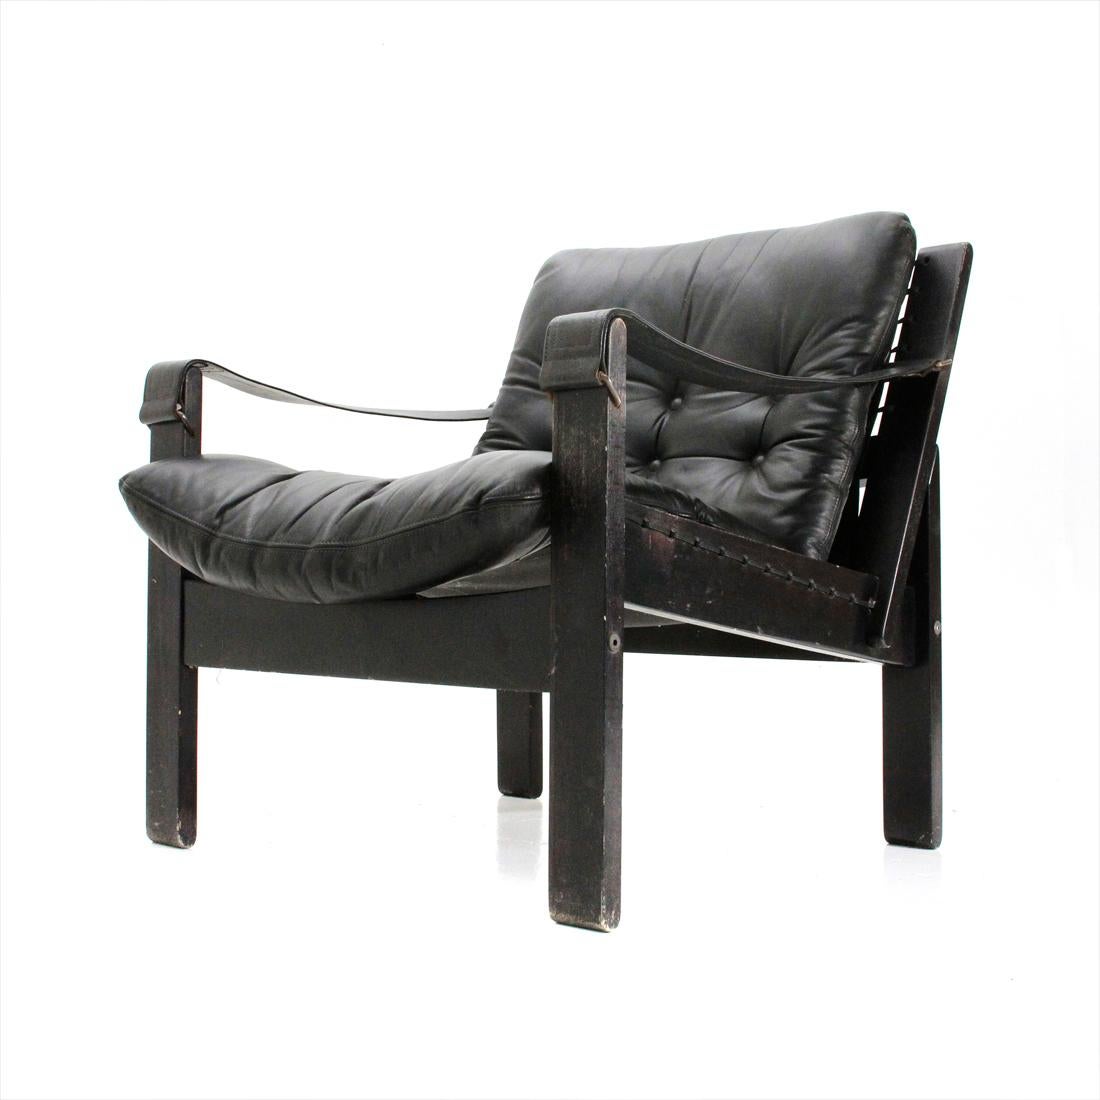 Late 20th Century Mid-Century Modern Black Leather Armchair, 1970s For Sale